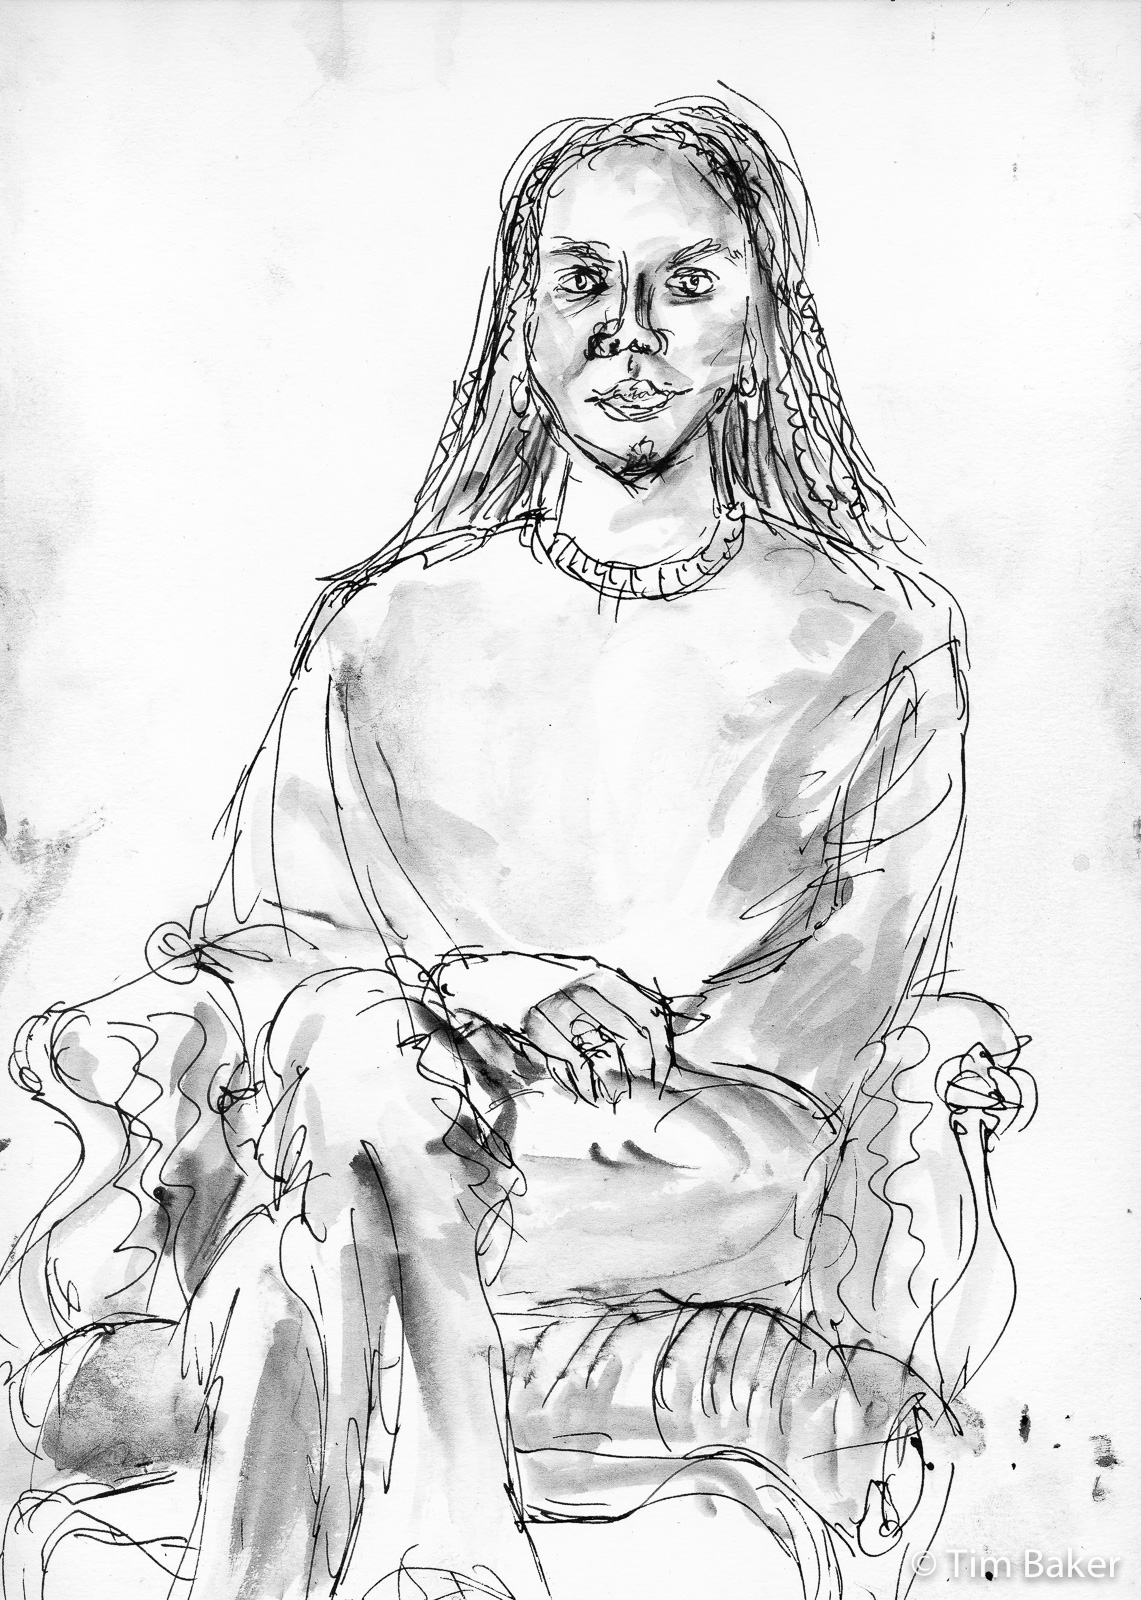 Mariam, Portraits At the Pub, Fountain pen and wash, A4 Fabriano Mixed Media Pad